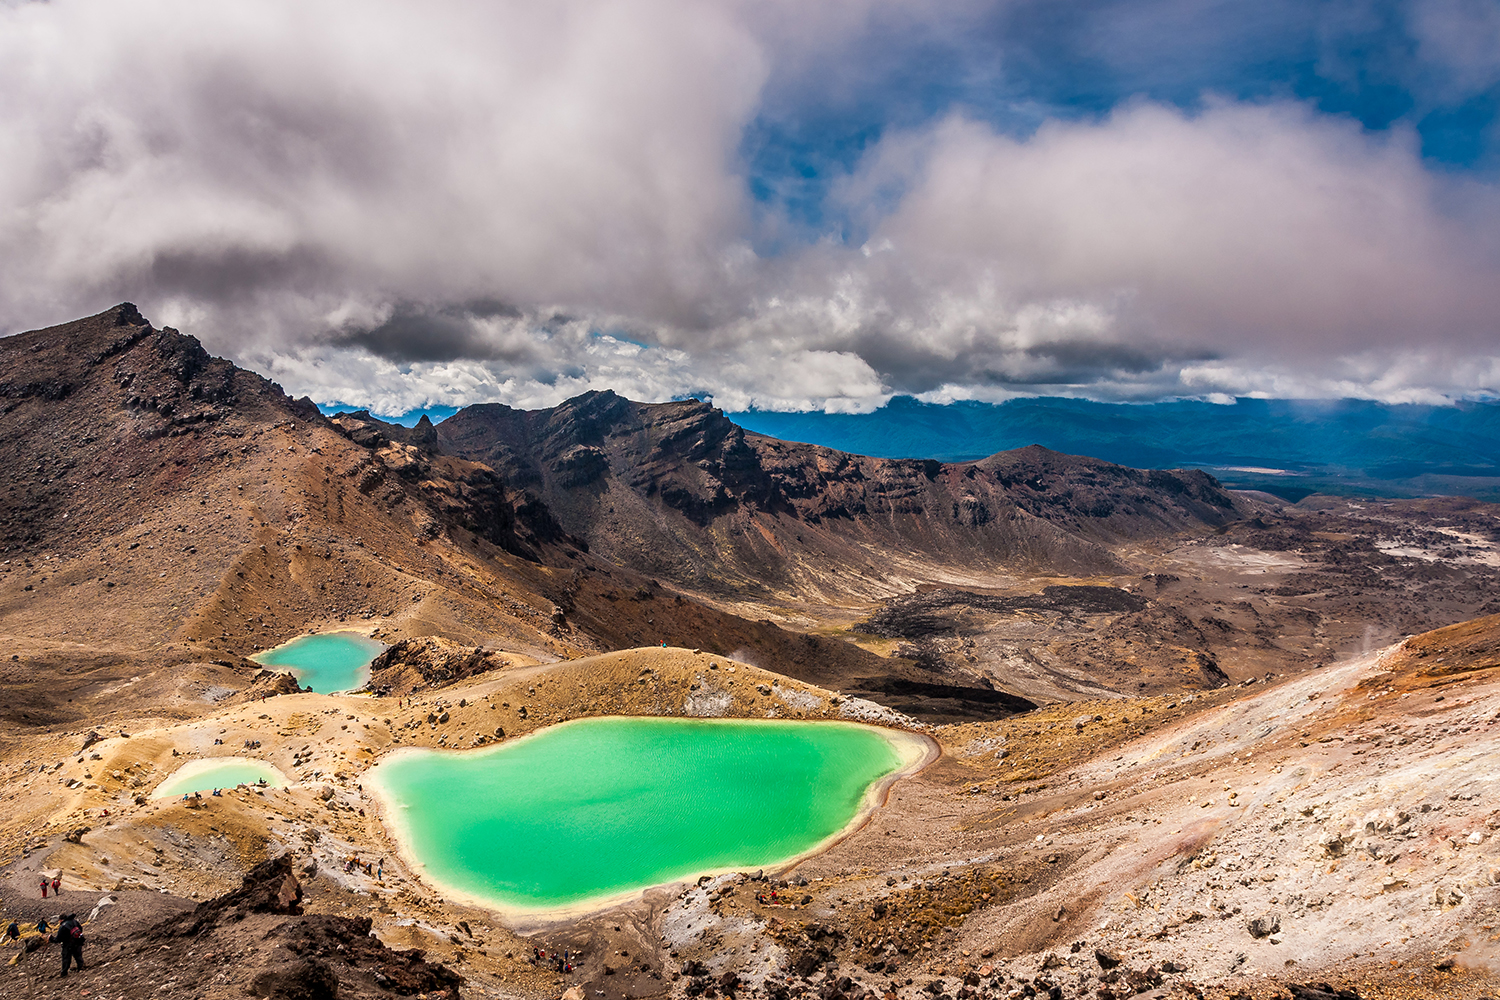 The Emerald Lakes, seen here from the Red Crater, are one of the most dazzling sights on New Zealand's Tongariro Alpine Crossing. Image by mhx / CC BY-SA 2.0